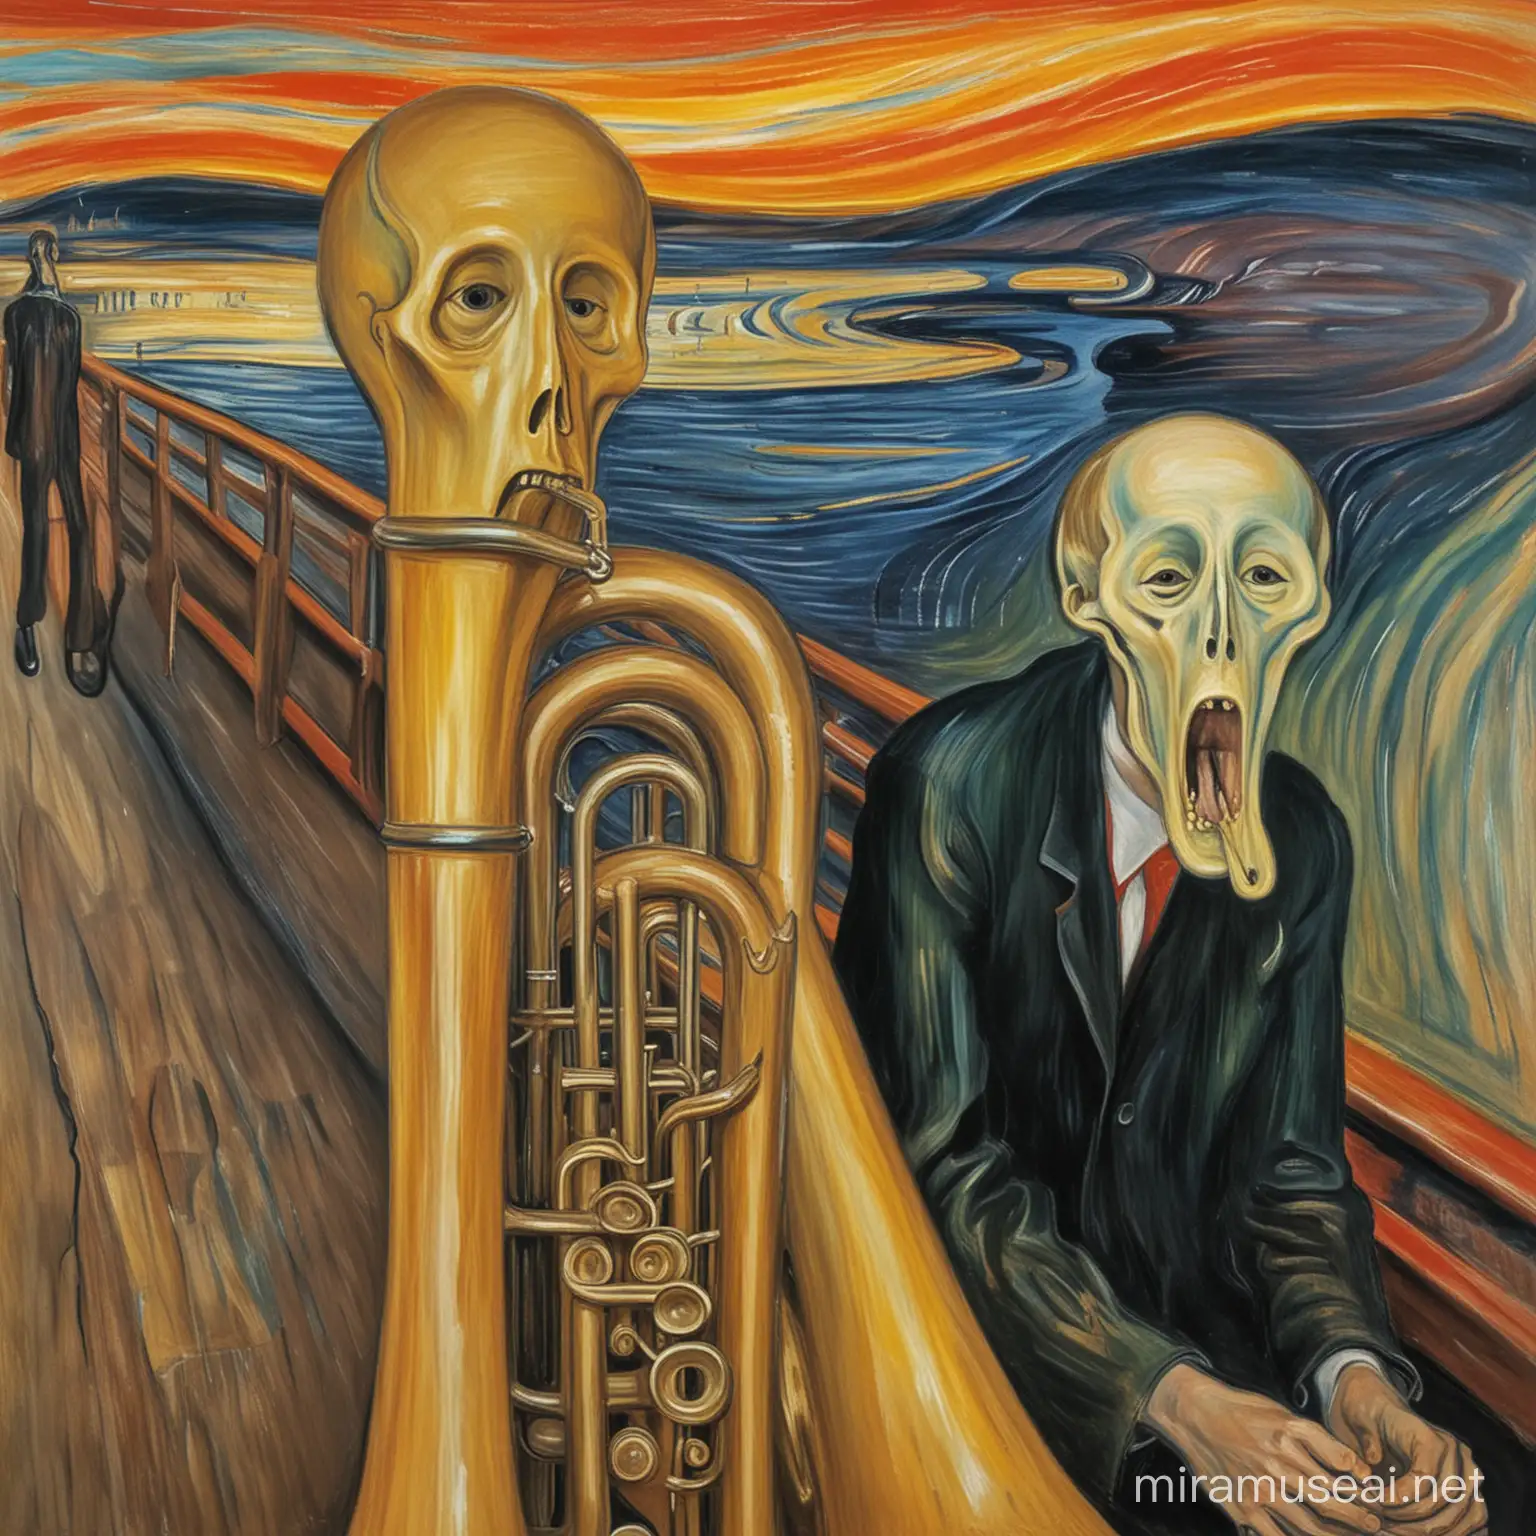 Edvard Munch's painting 'the scream' featuring two tuba players in agony